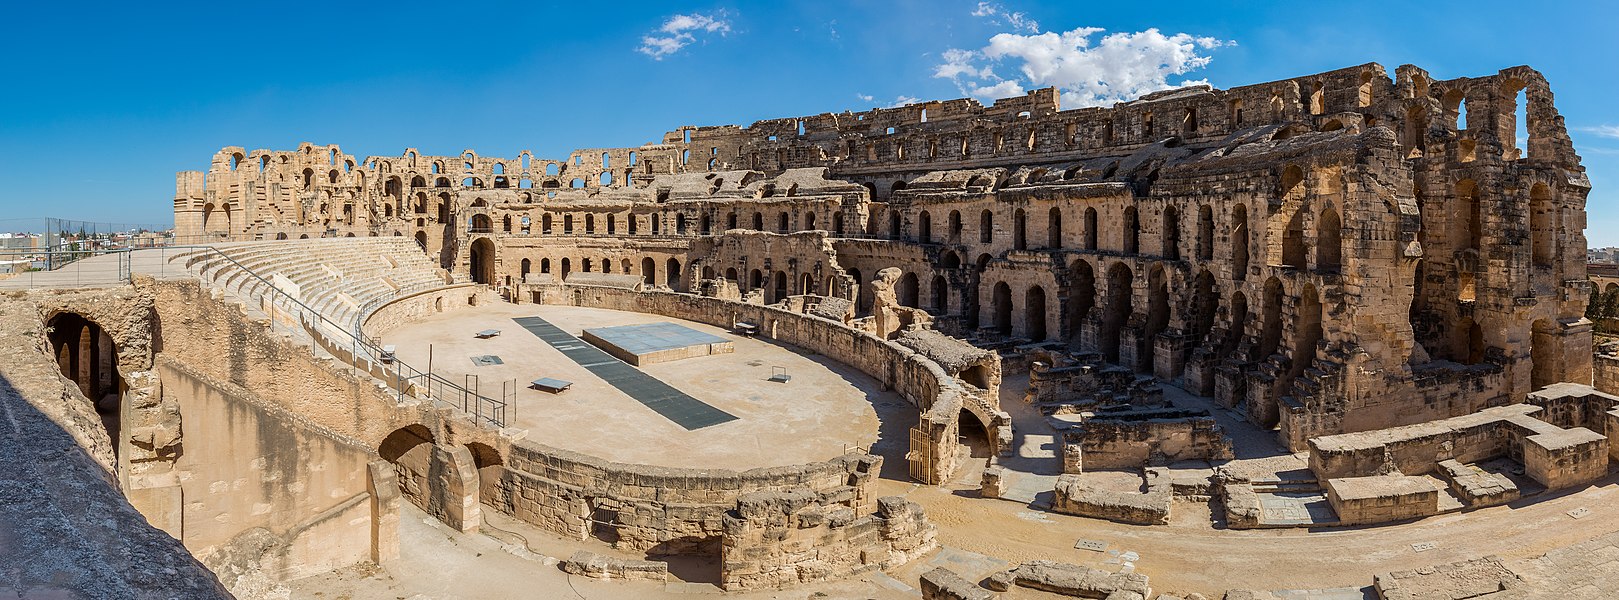 Tunisia: Panoramic view of the Amphitheatre of El Jem, an archeological site in the city of El Djem. The amphitheatre, a UNESCO World Heritage Site since 1979, was built around 238 AD, when the modern Tunisia belonged to the Roman province of Africa. It is the third-biggest amphiteatre and one of the best-preserved Roman ruins in the world, with a capacity for 35,000 spectators.